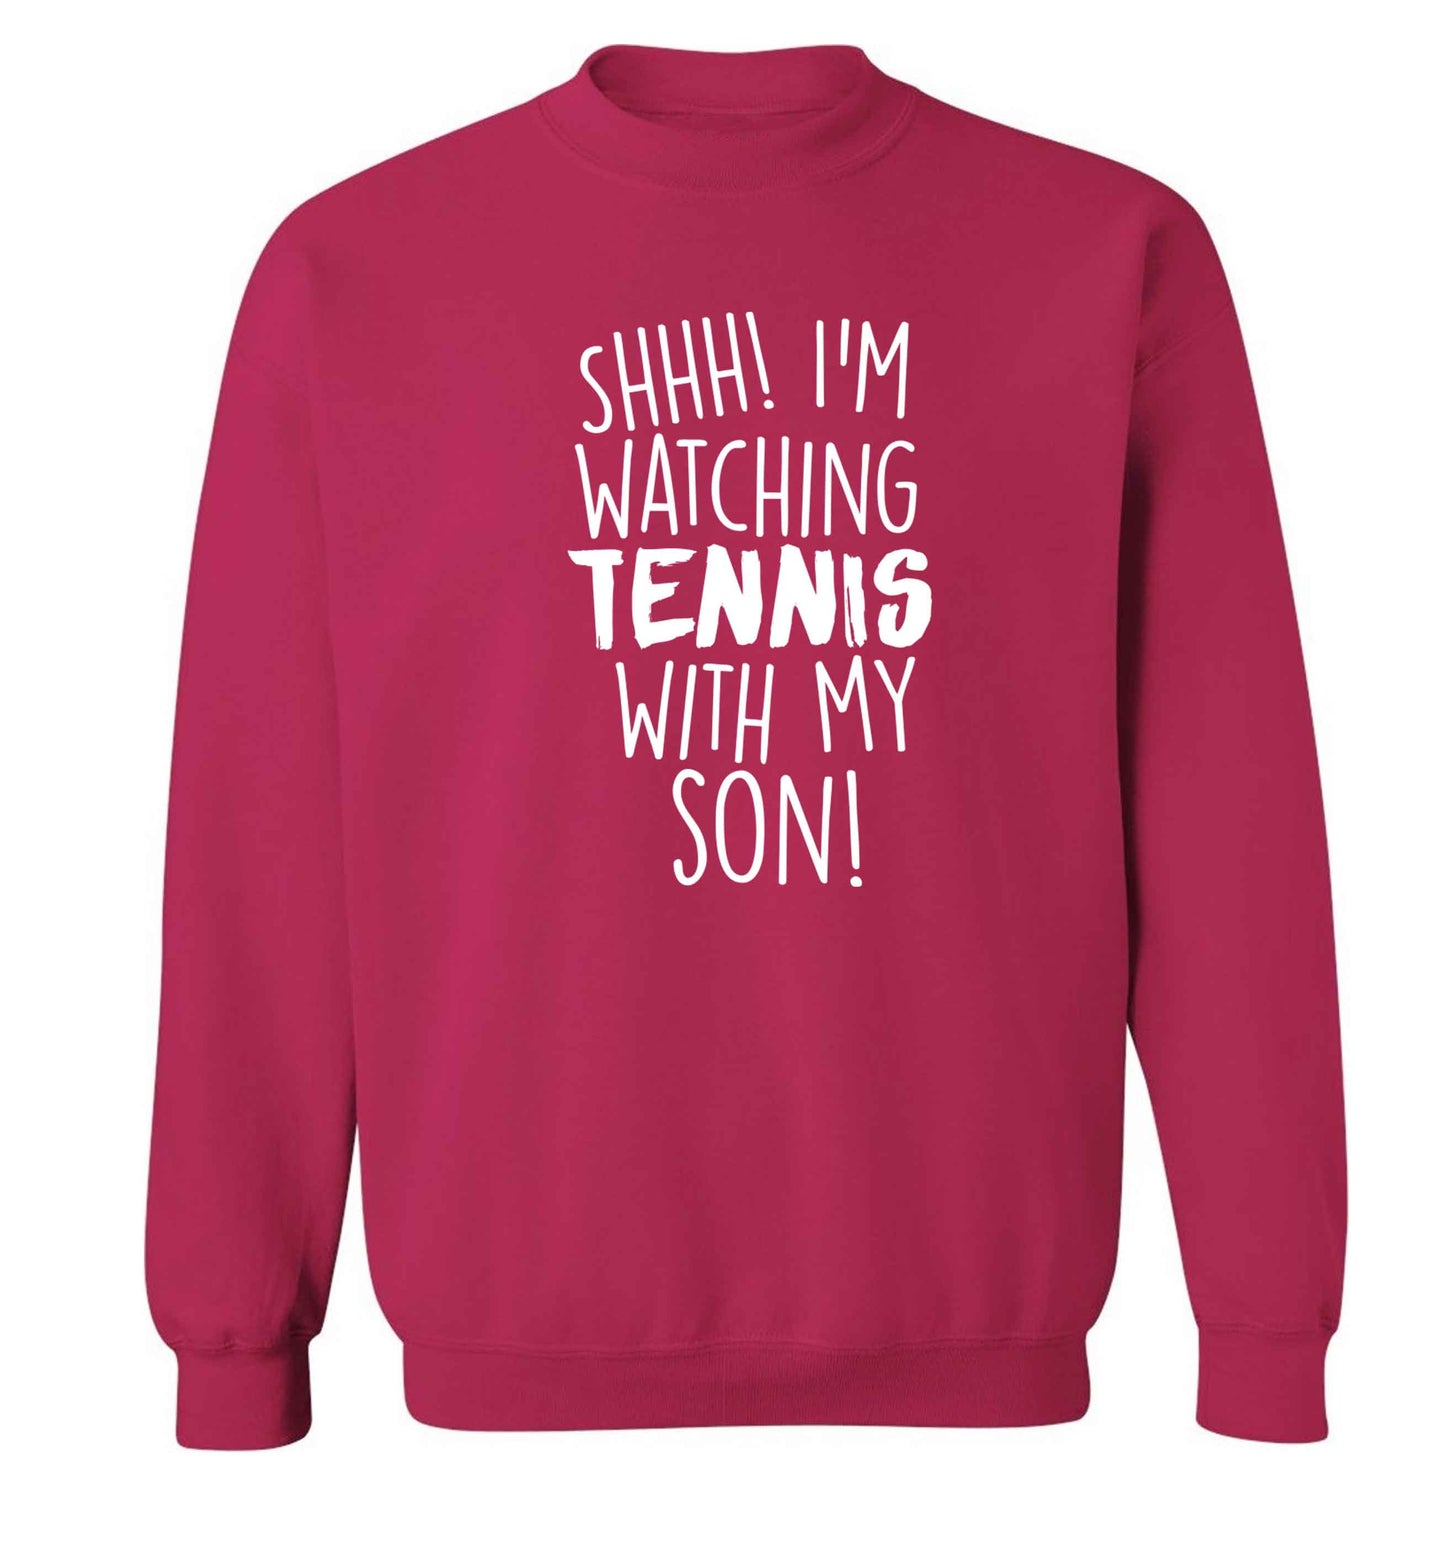 Shh! I'm watching tennis with my son! Adult's unisex pink Sweater 2XL